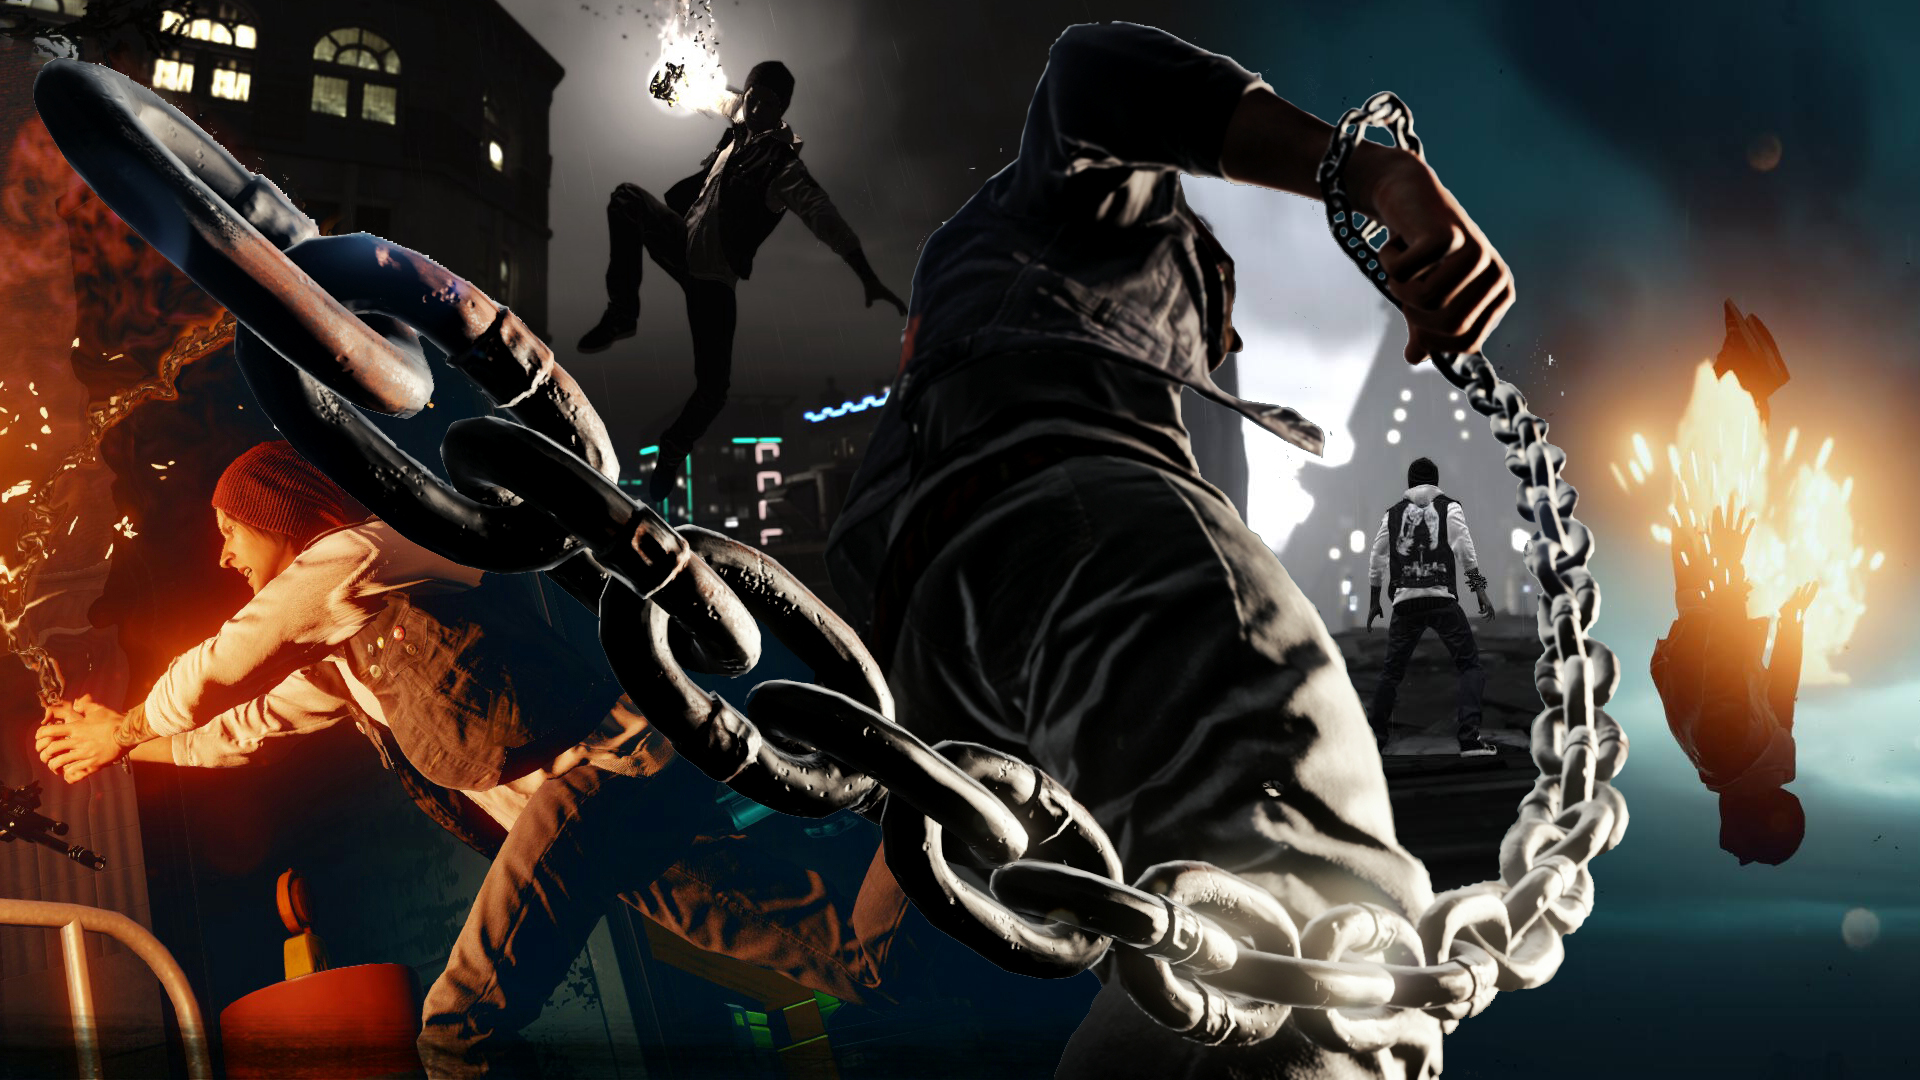 HD wallpaper Video Game inFAMOUS Second Son  Wallpaper Flare